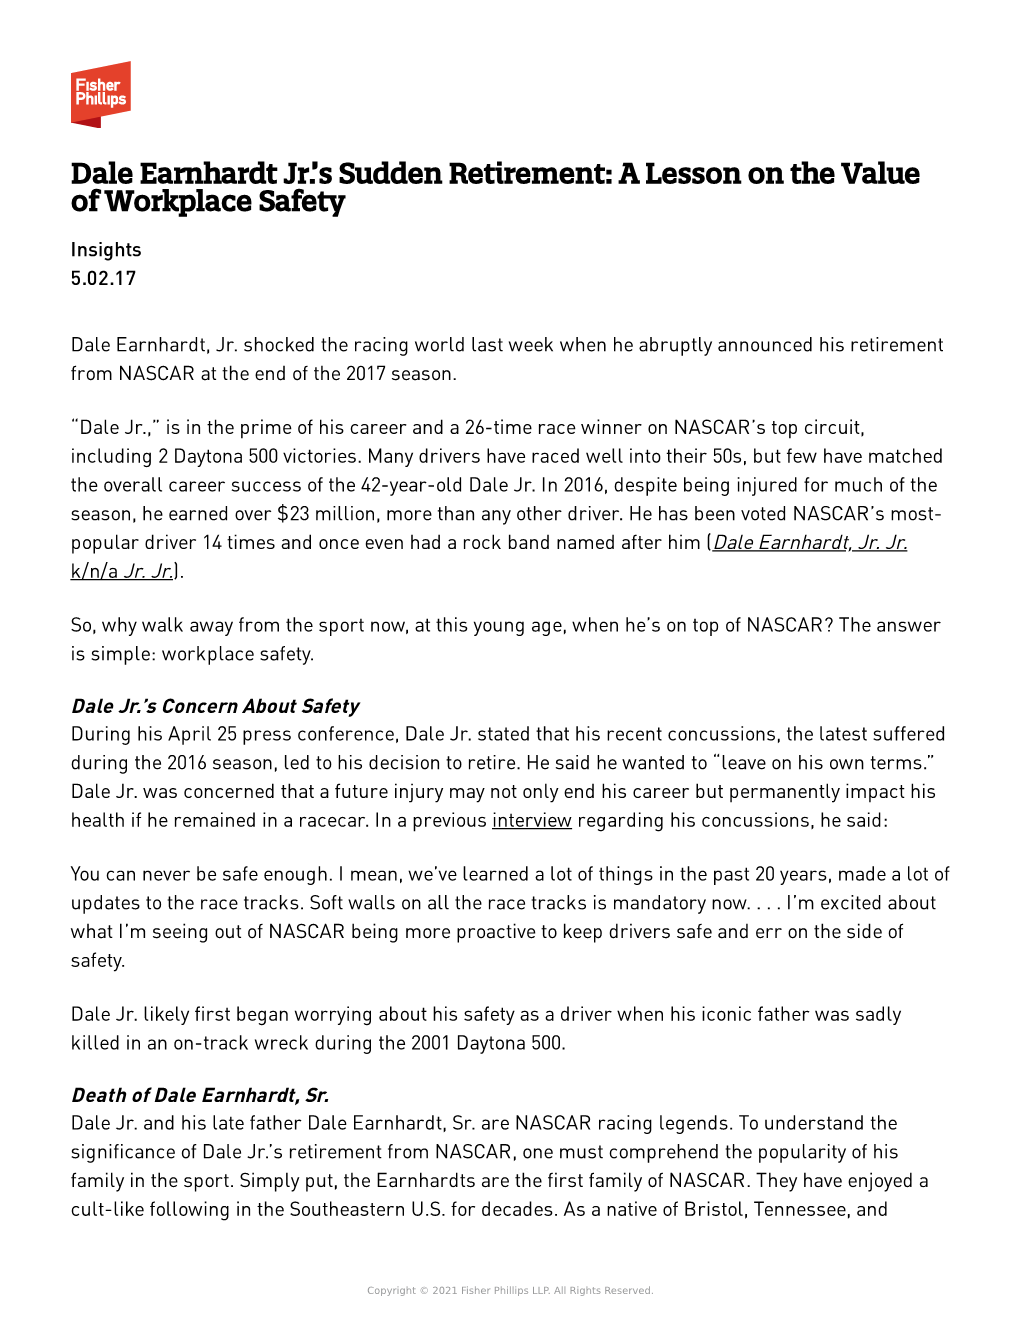 Dale Earnhardt Jr.’S Sudden Retirement: a Lesson on the Value of Workplace Safety Insights 5.02.17